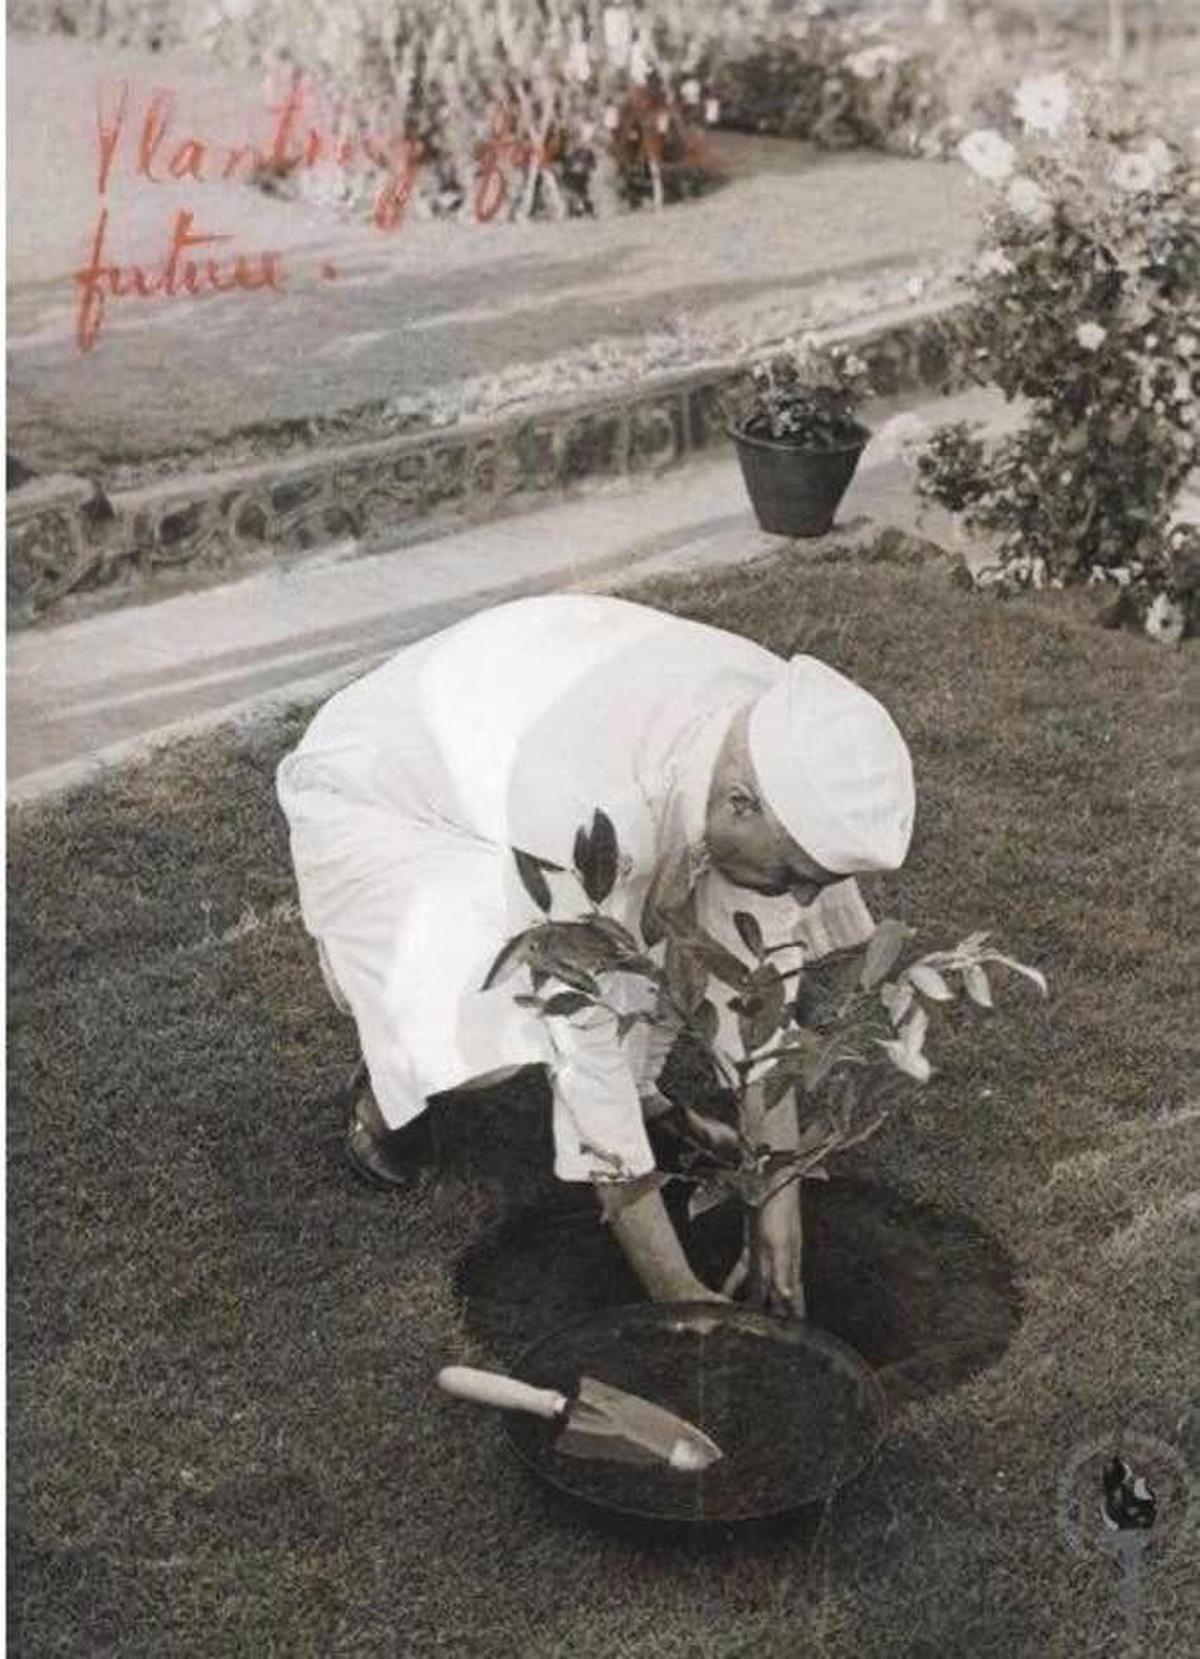 A photograph of former PM Jawaharlal Nehru planting a sapling in the Aarey forest in 1951.